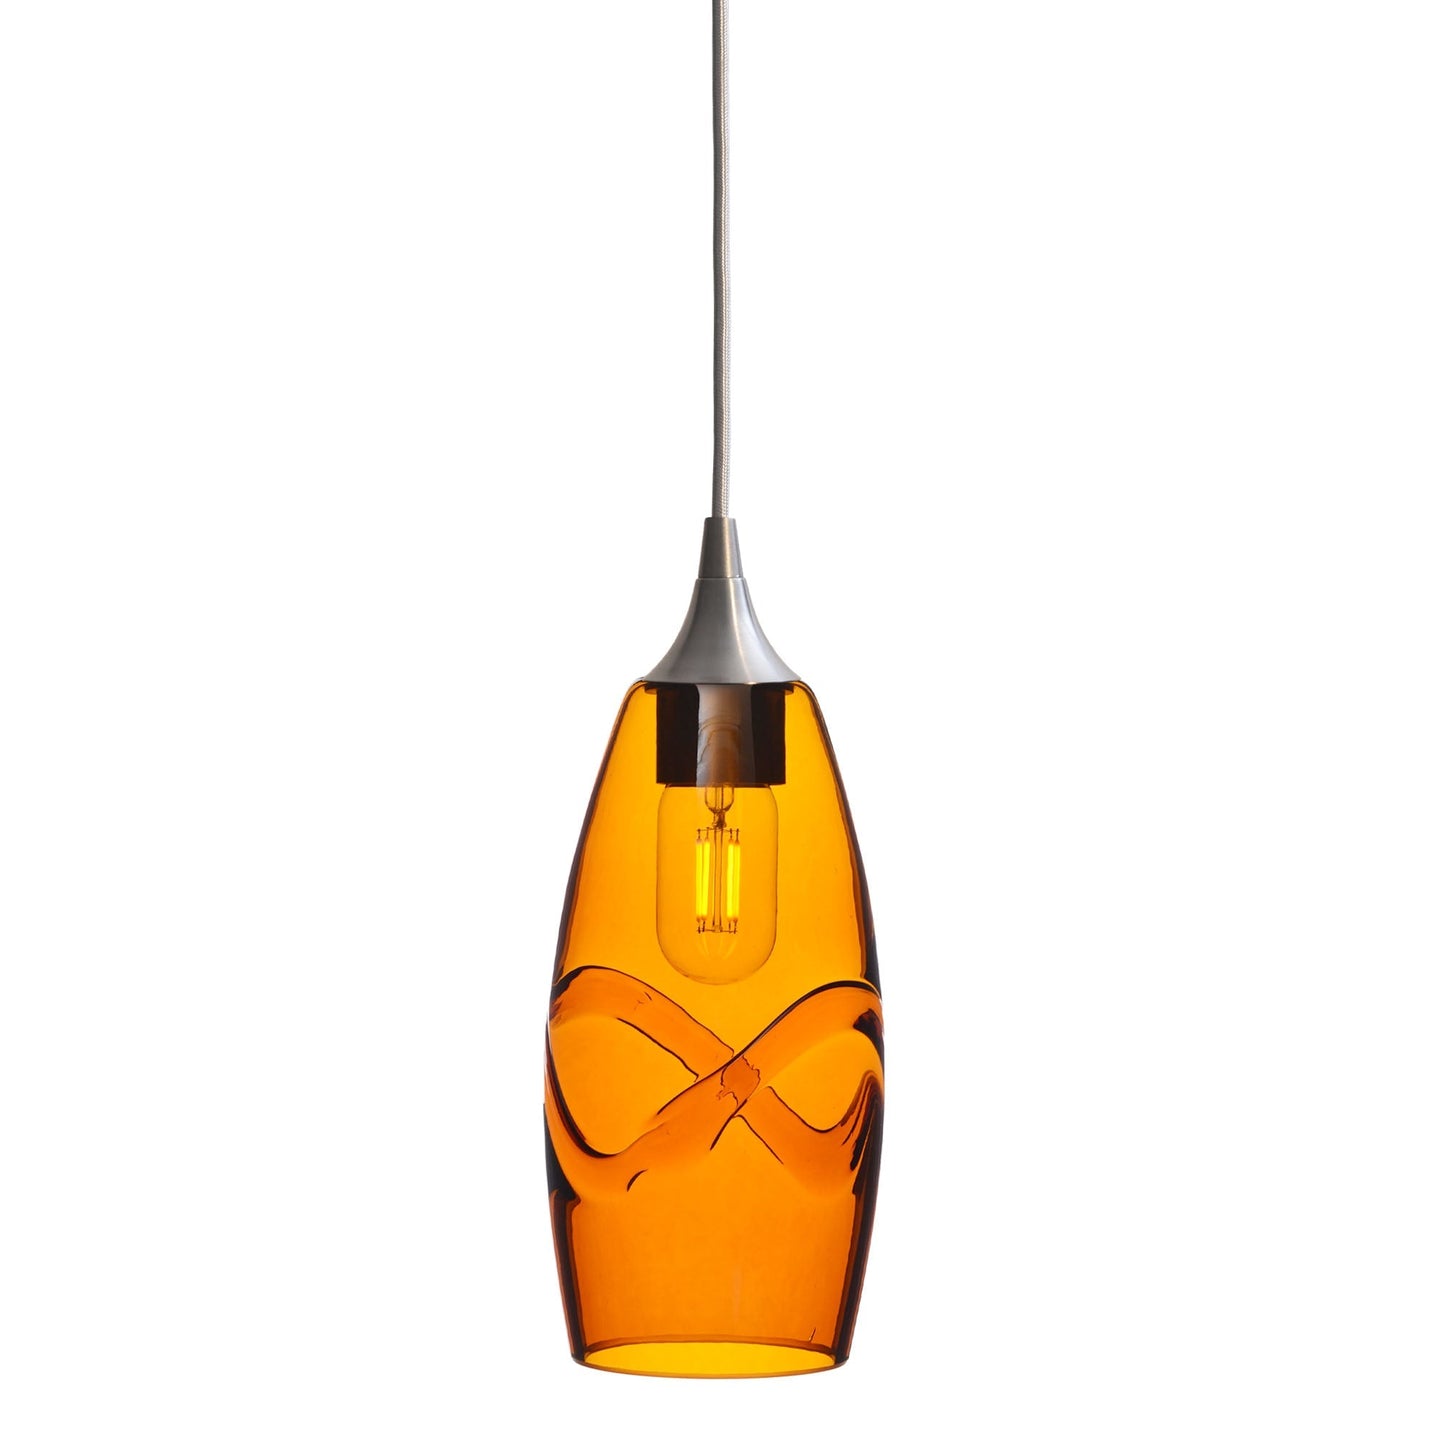 147 Swell: Single Pendant Light-Glass-Bicycle Glass Co - Hotshop-Harvest Gold-Brushed Nickel-Bicycle Glass Co